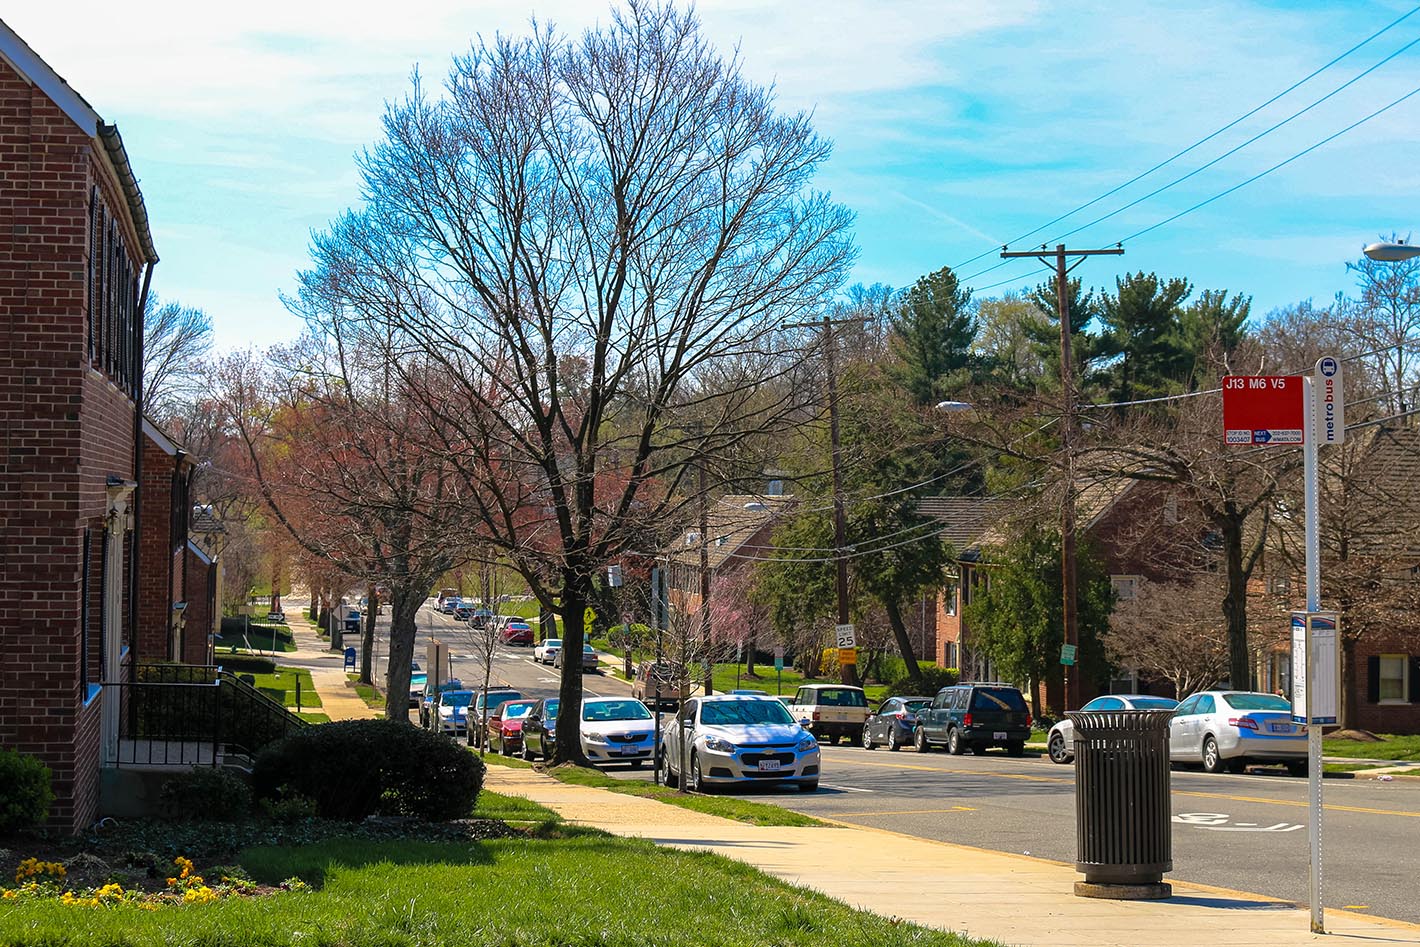 Residential street view in Hillcrest, Washington, D.C.